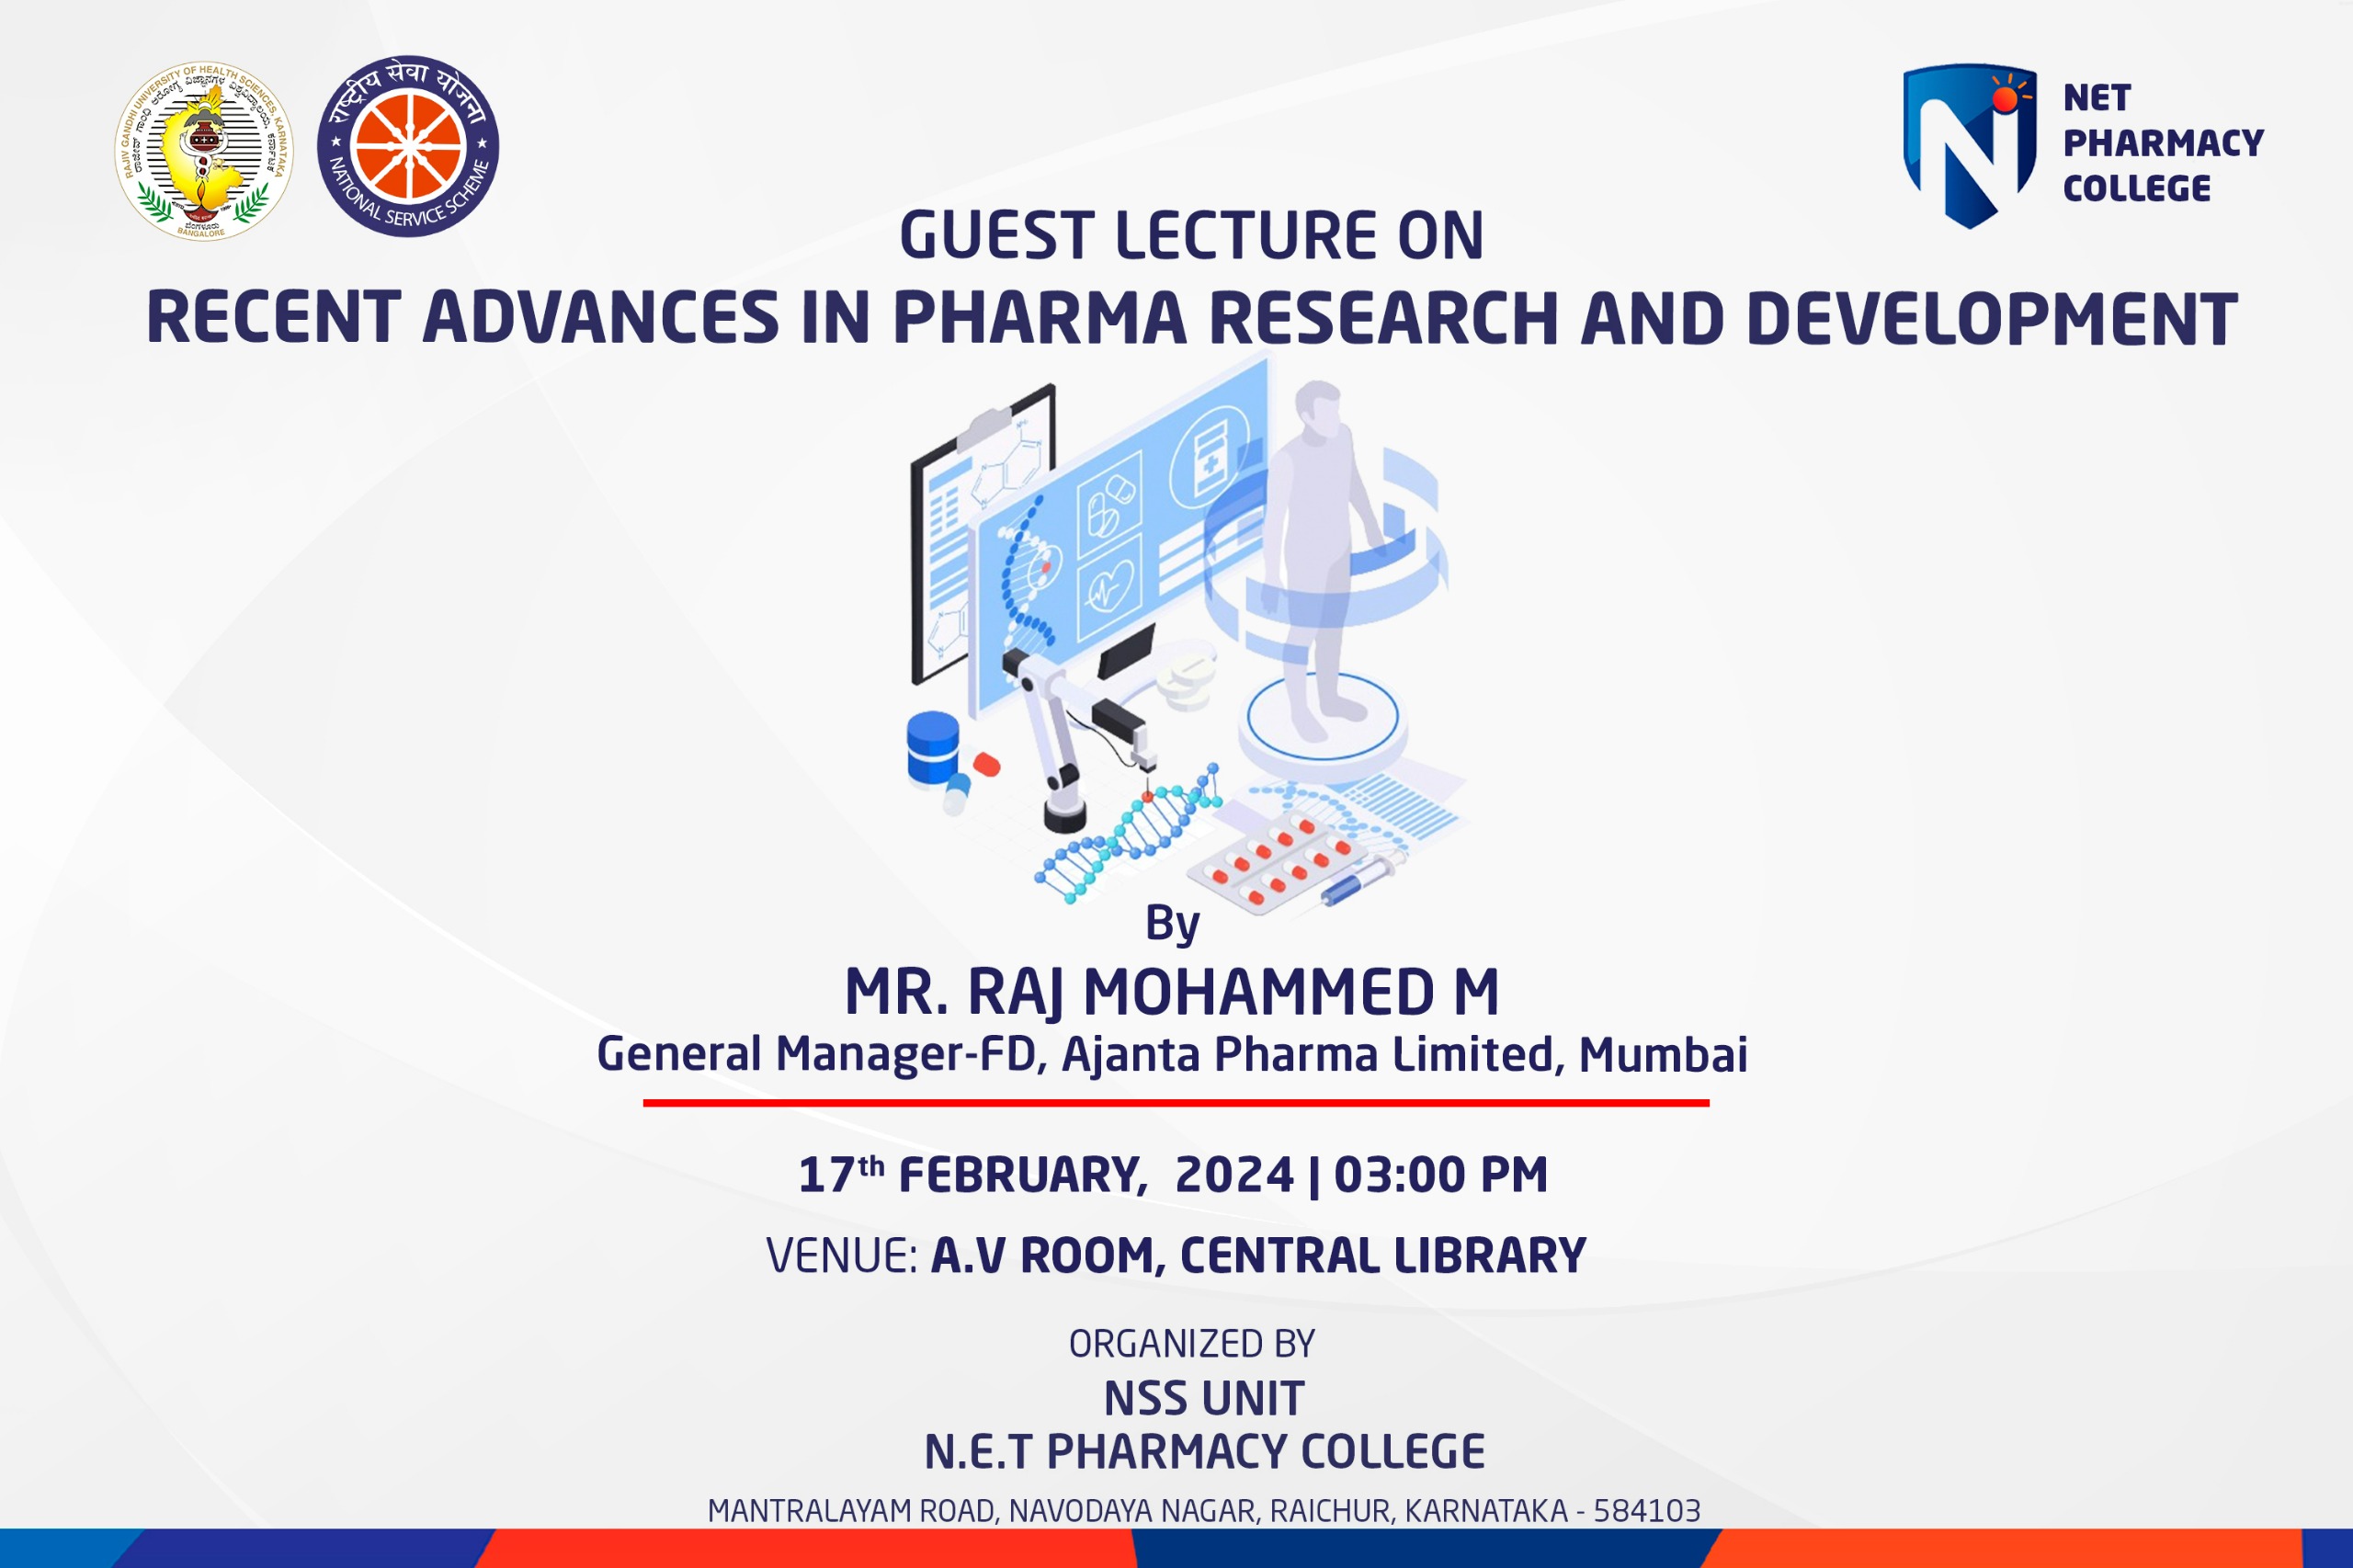 Guest Lecture on Recent Advances in Pharma Research and Development